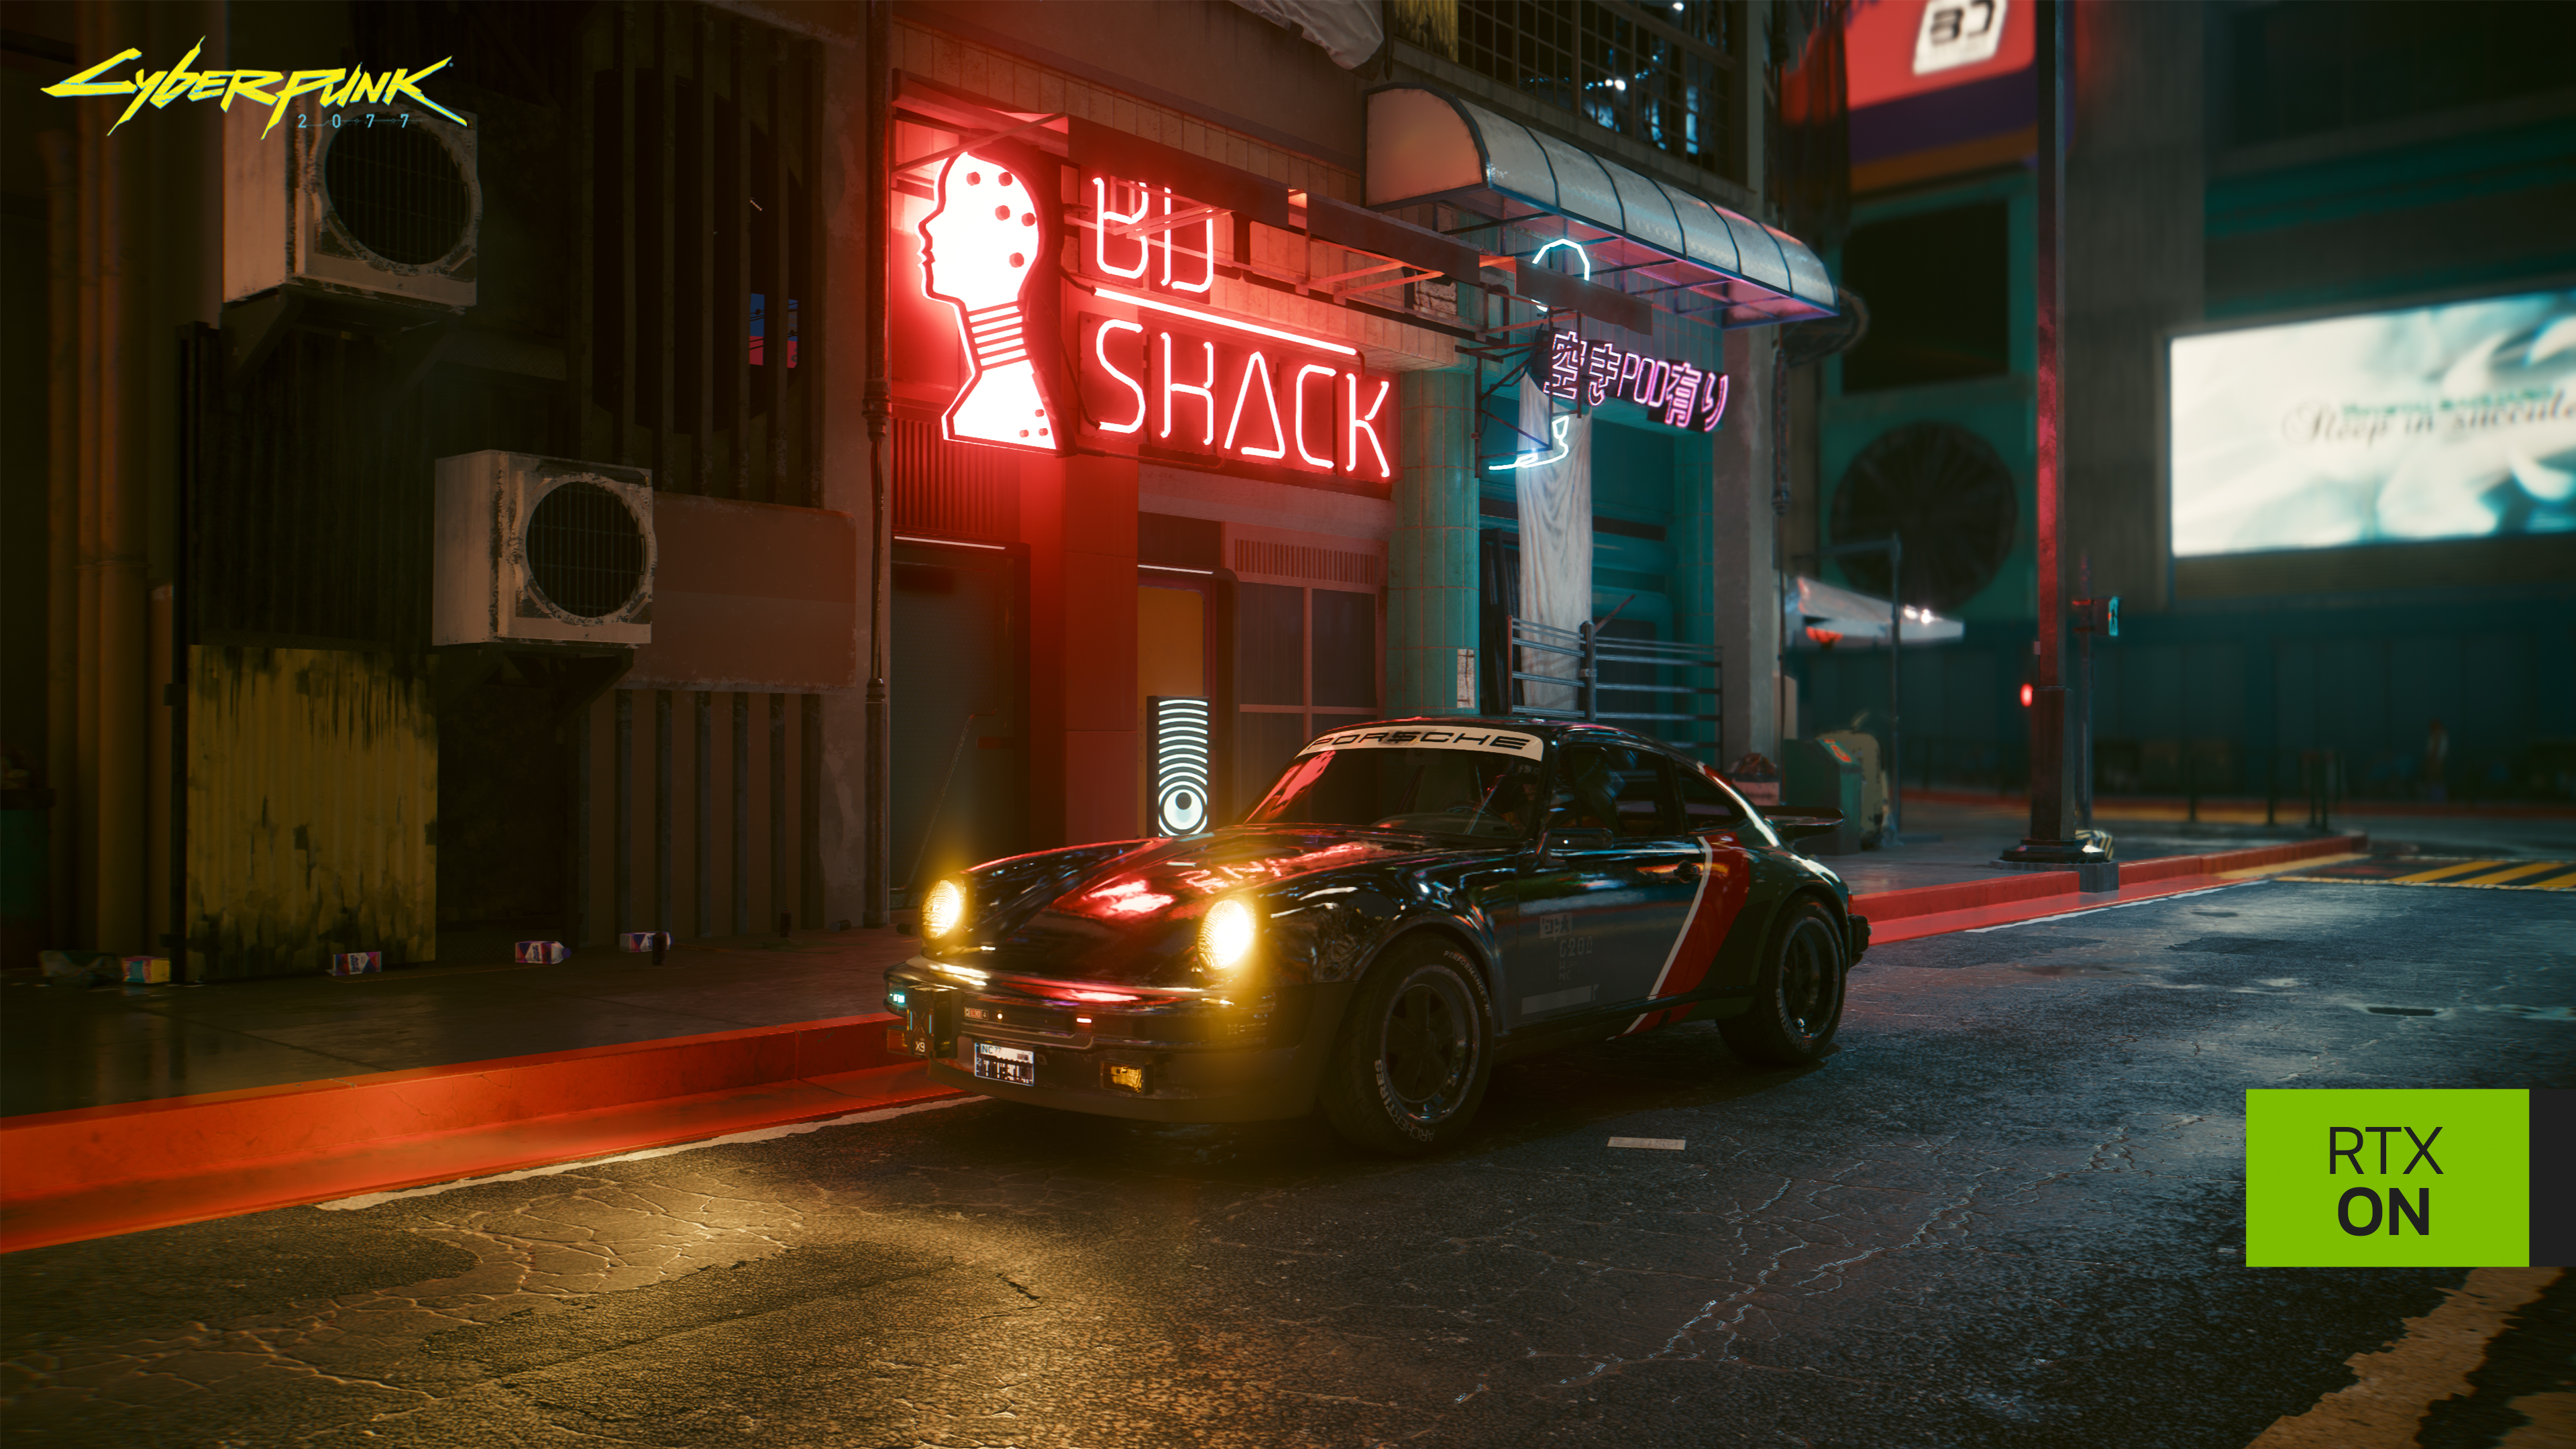 Heavily-Modded Cyberpunk 2077 Overdrive Mode With Path Tracing on an RTX  4090 is on Another Level